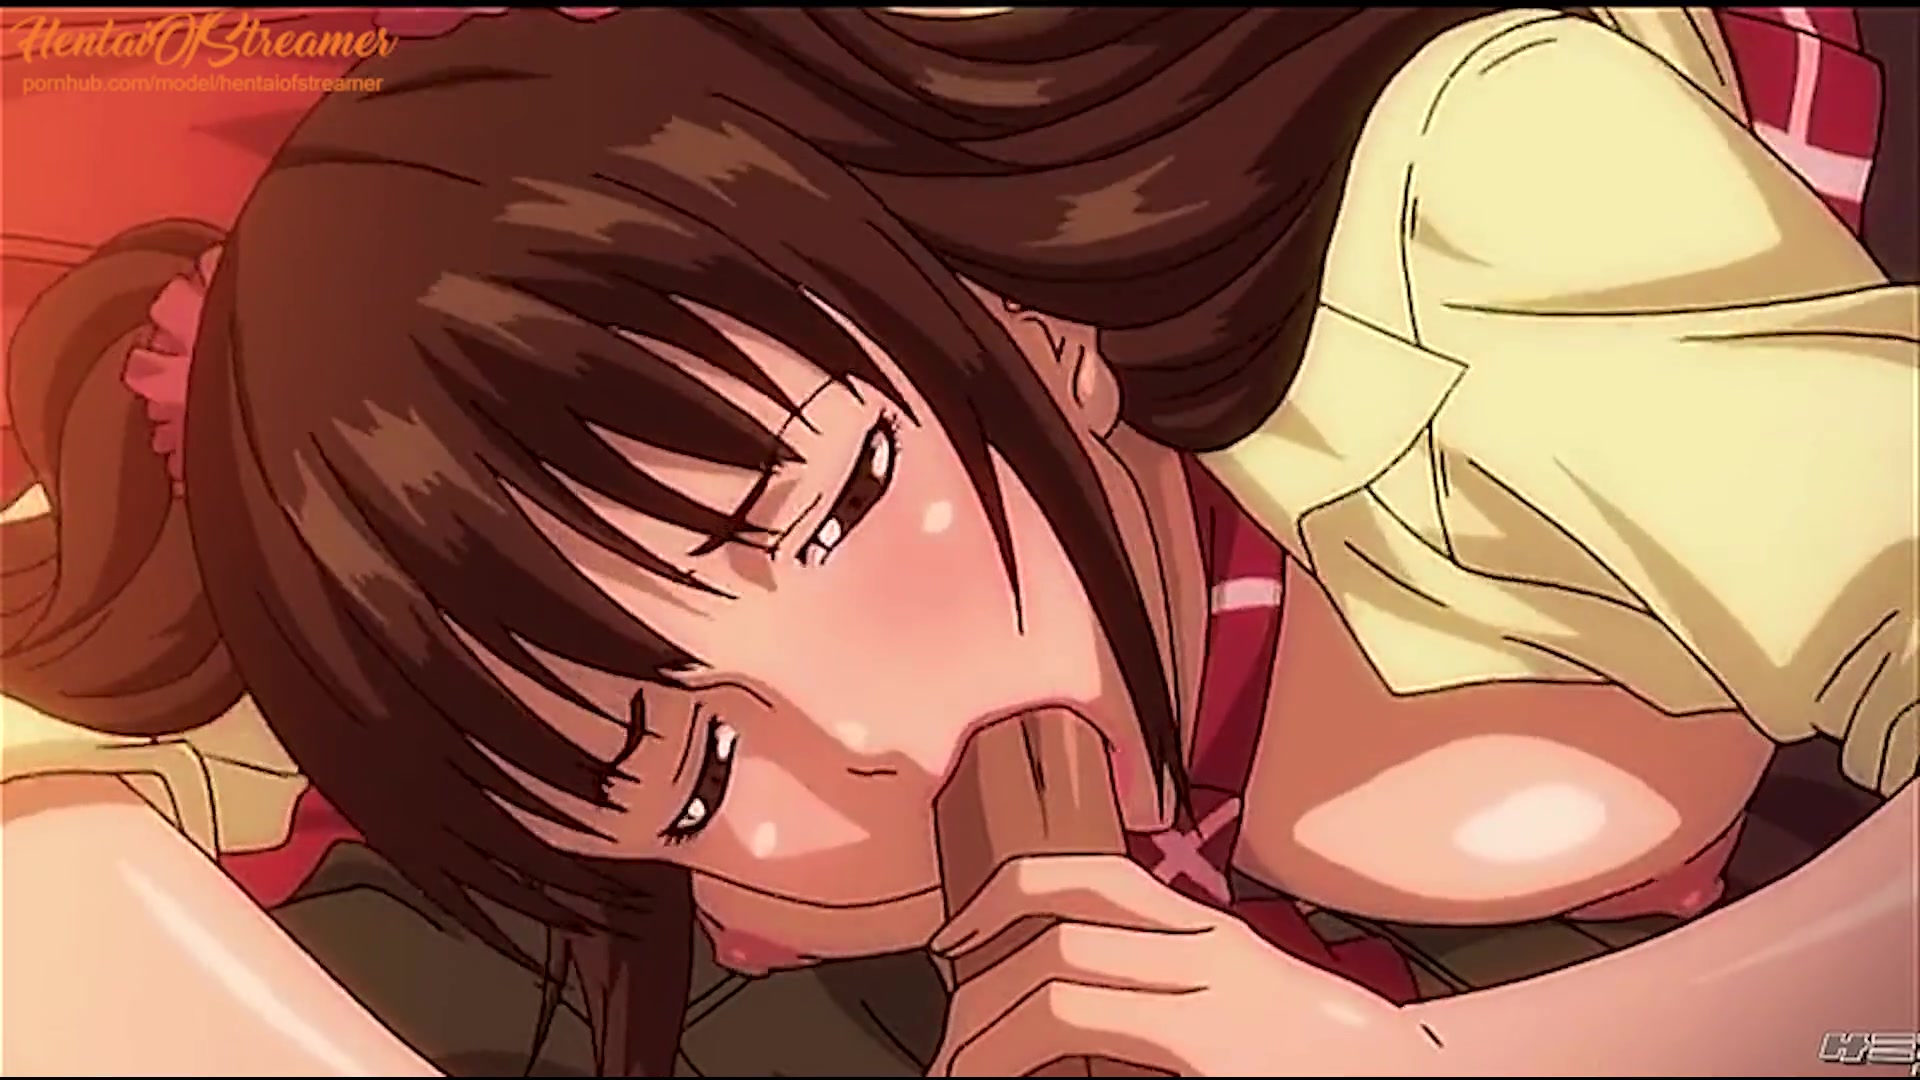 Deepthroat Anime Porn - Anime Porn Uncensored | Hotwife Dude Sees his Gf Plumb and Deep-Throat off  another Stud | Anime Porn, Anime - uiPorn.com